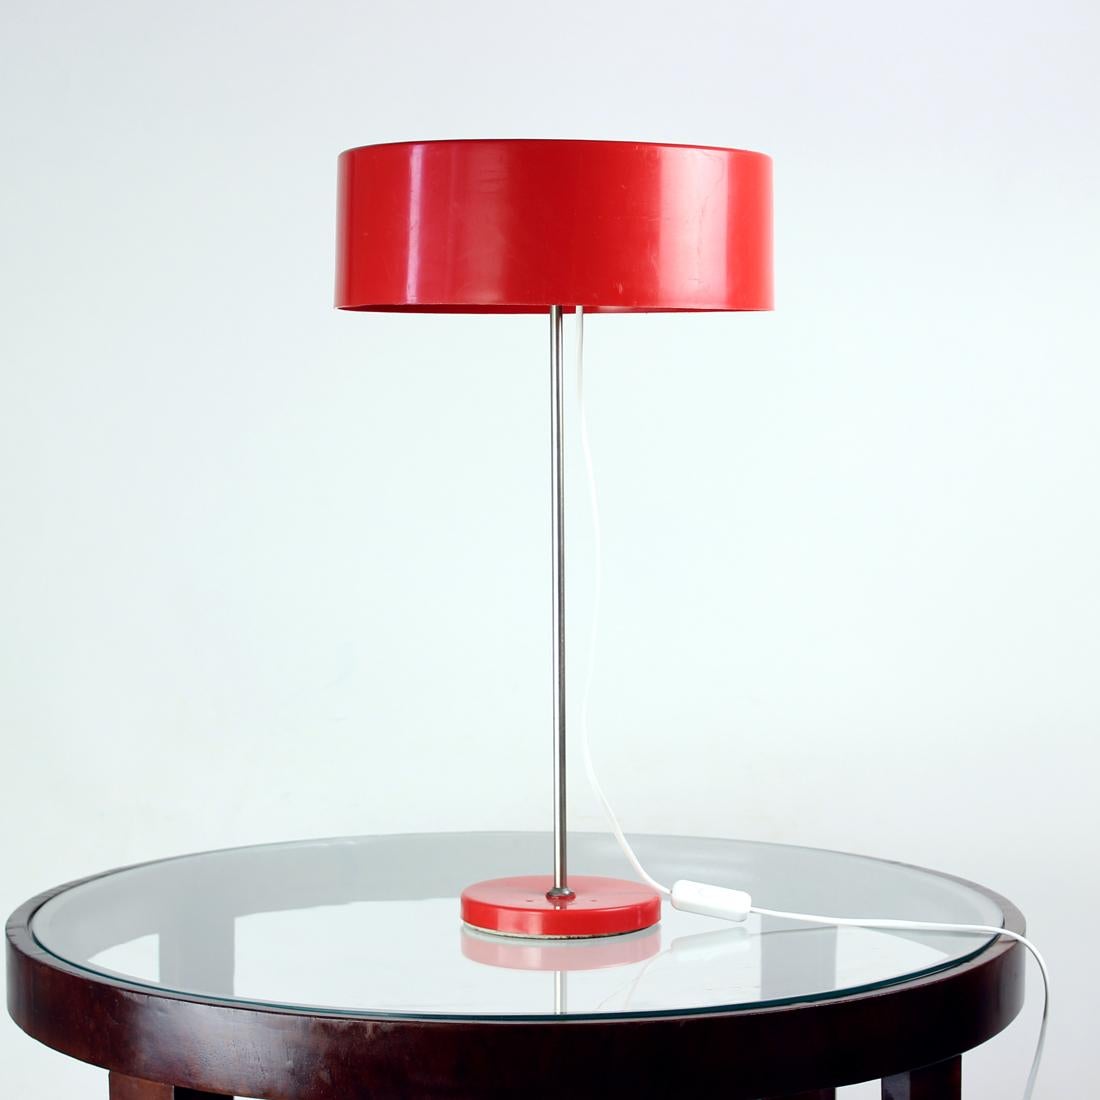 Beautiful mid-century table lamp produced by Kamenicky Senov in Czechoslovakia in 1970s. The lamp is a typical Space age era design using the typical materials and design features. The shiels and base are made of red plastic. The design is elegant,